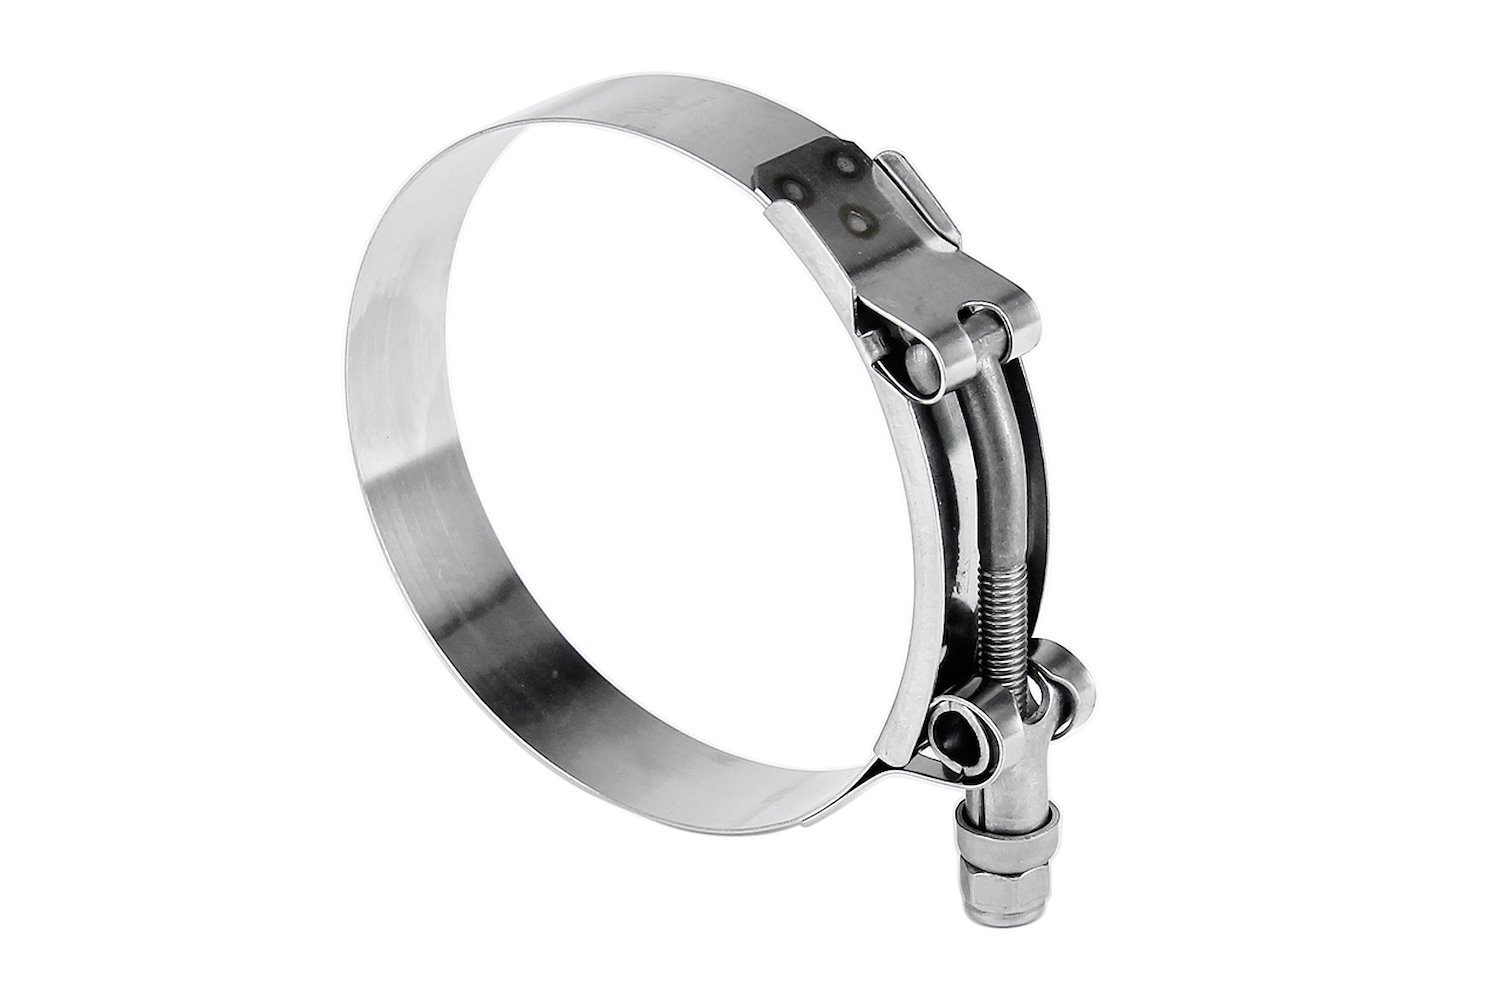 316-SSTC-57-65 100-Percent Marine Grade Stainless Steel T-Bolt Hose Clamp, Size #44, Range: 2.25 in.- 2.56 in.